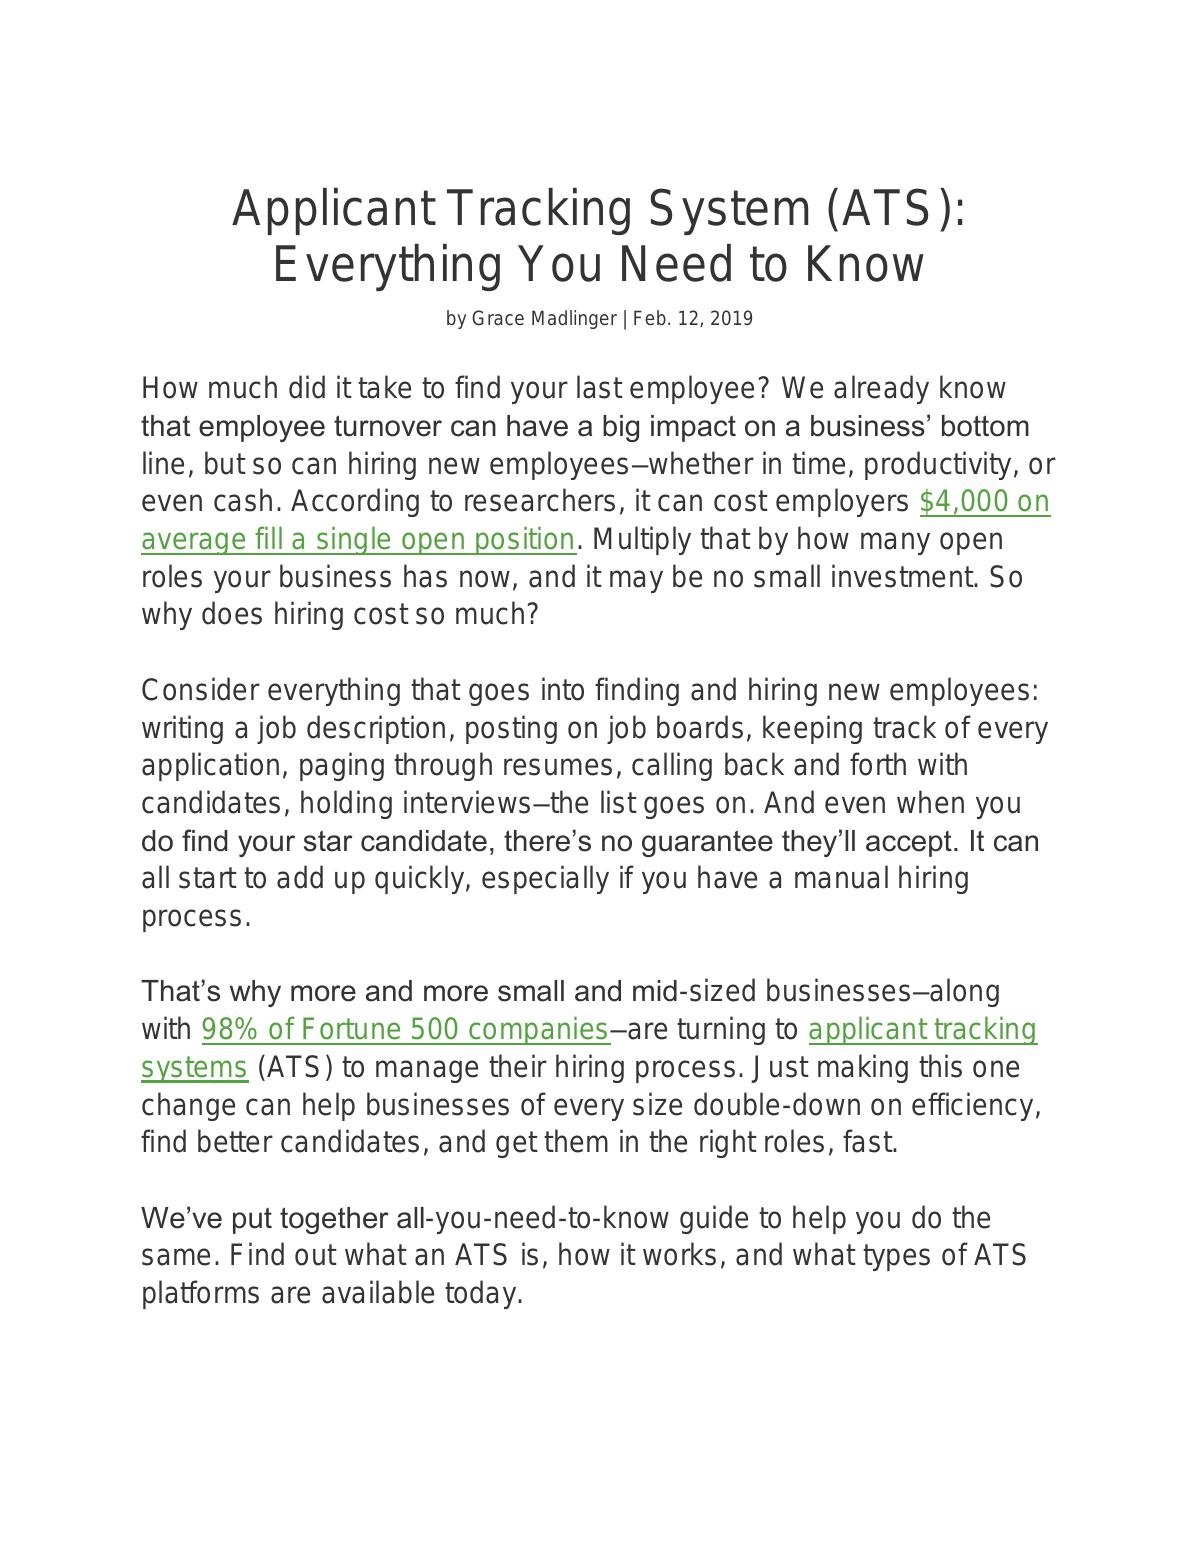 Applicant Tracking System (ATS): Everything You Need to Know